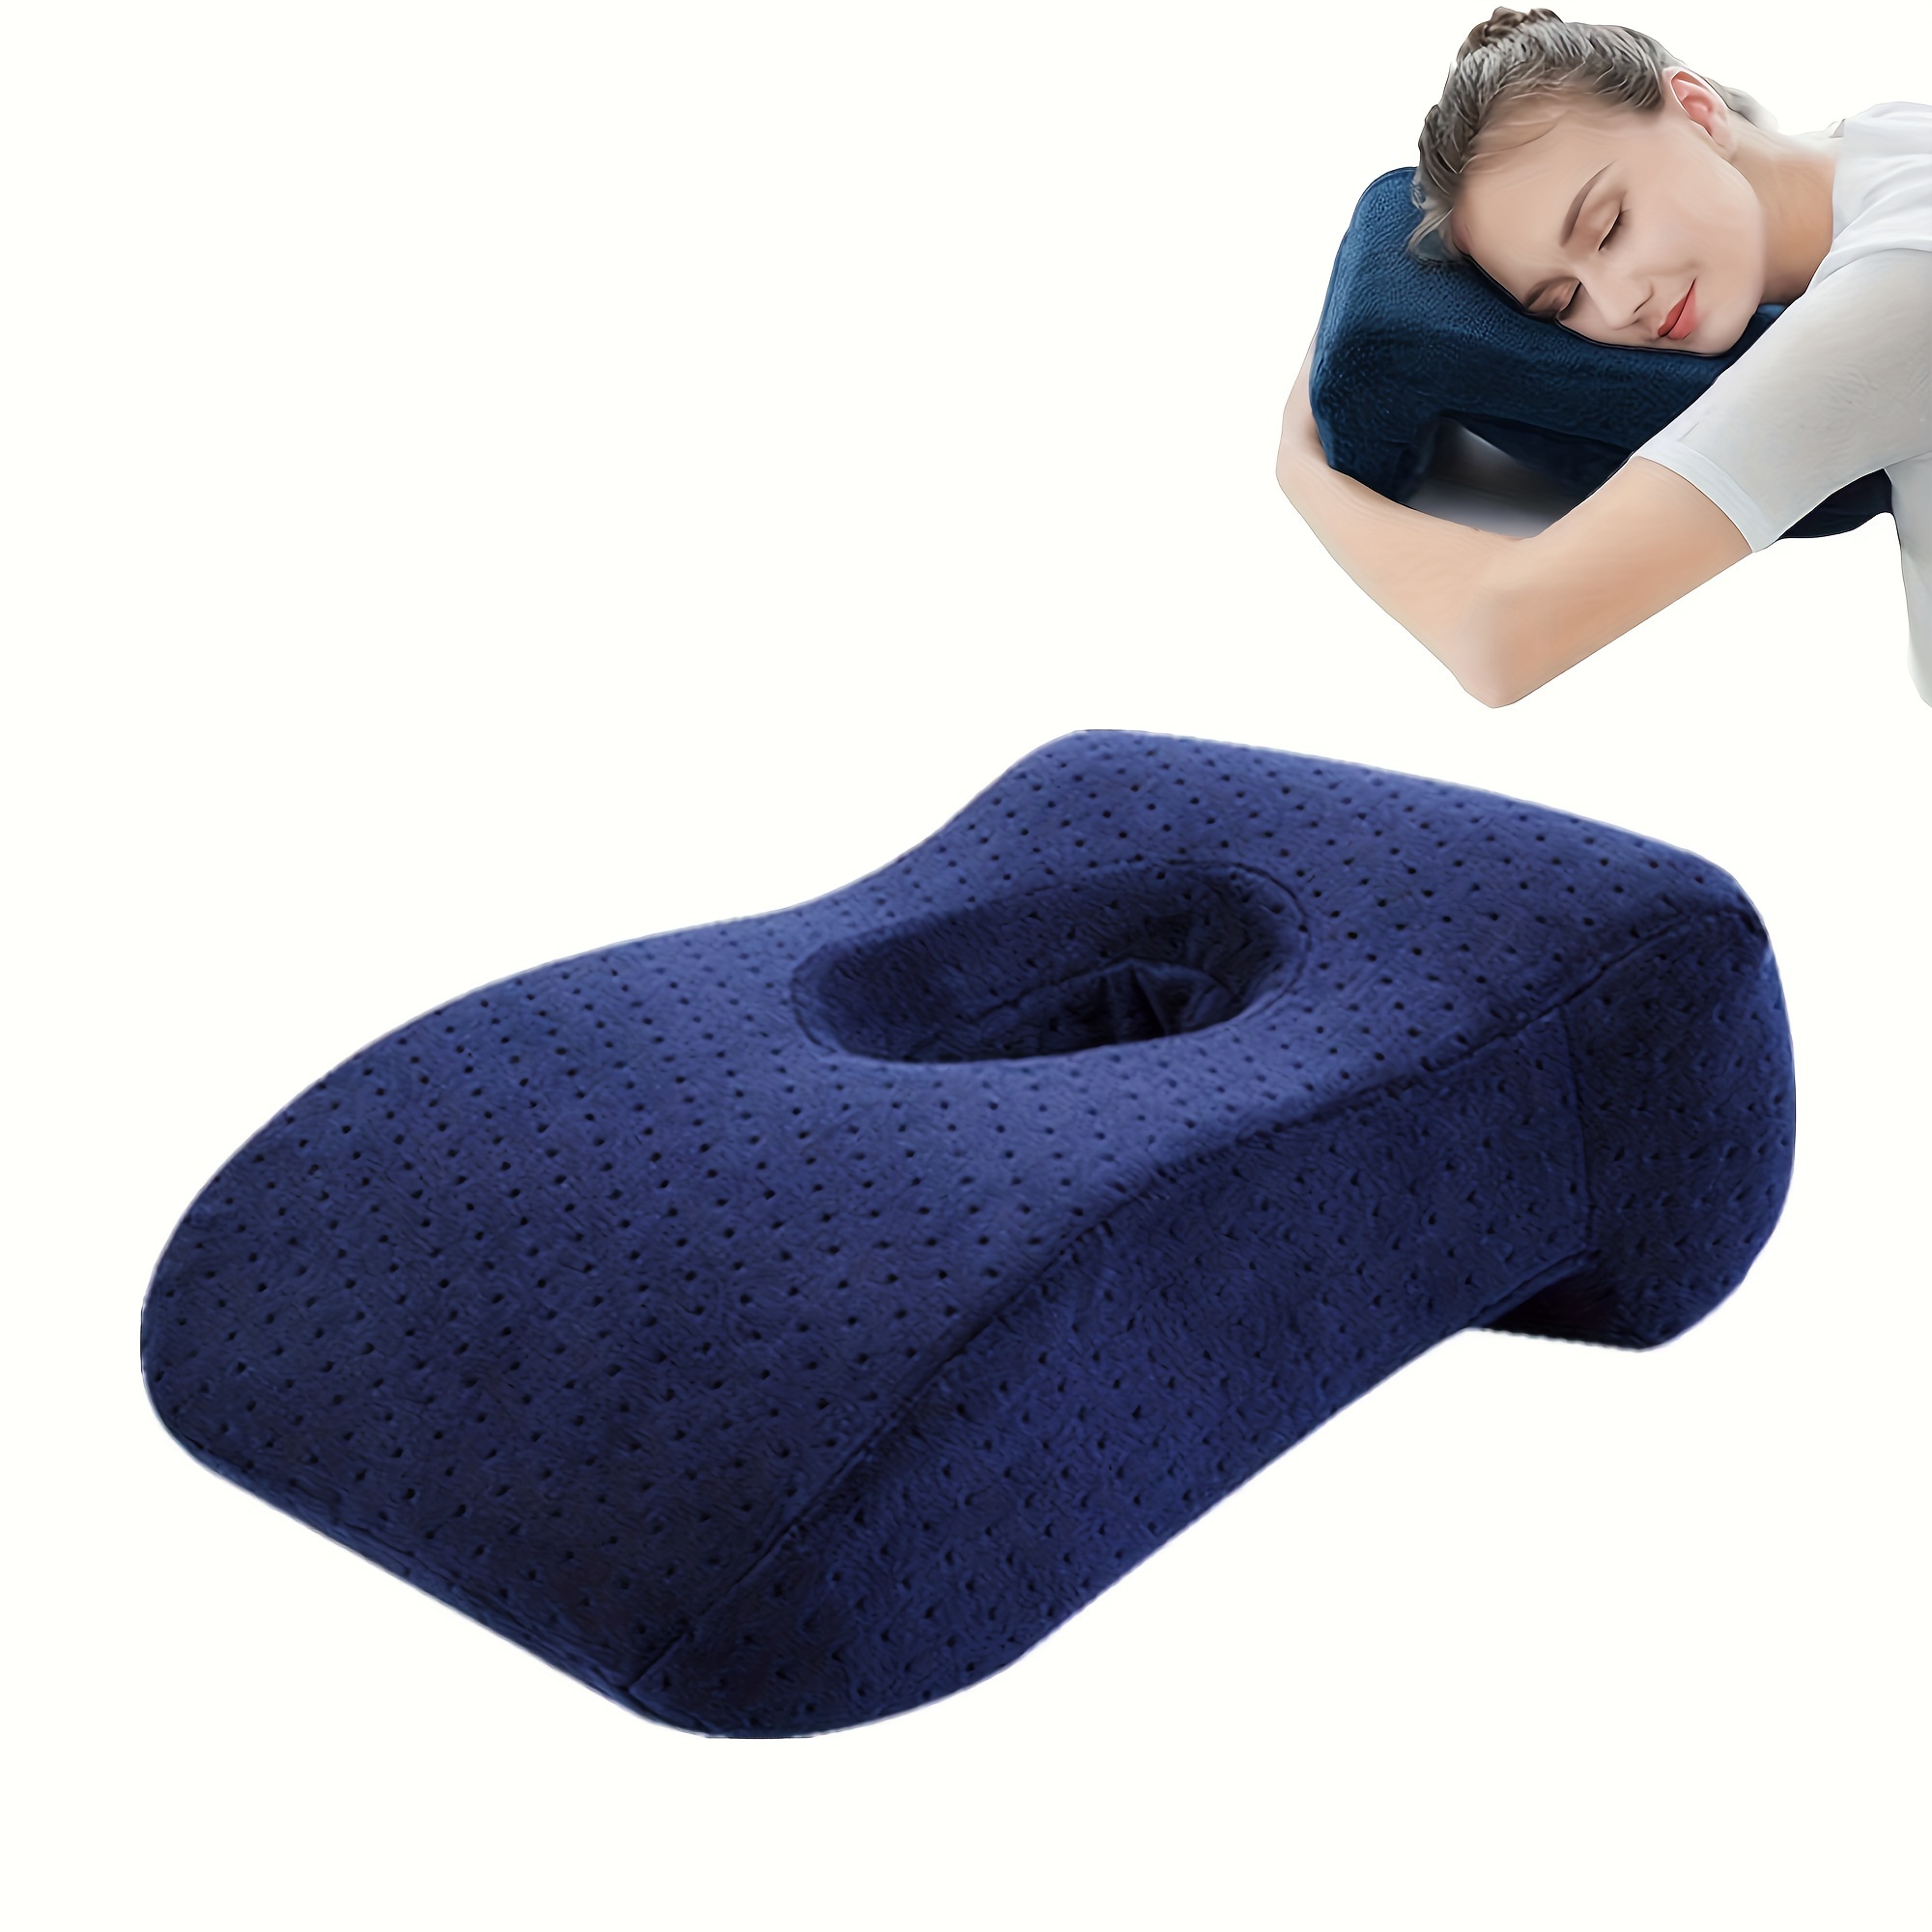 

Nap Sleeping Pillow, U-shaped Travel Pillow, Neck Cervical Pillow, Donut Pillow, Head Rest Pillow, Neck Bolster Support Pillow, Face Down Sleep Pillow, With Removable Cover, Quality Memory Foam